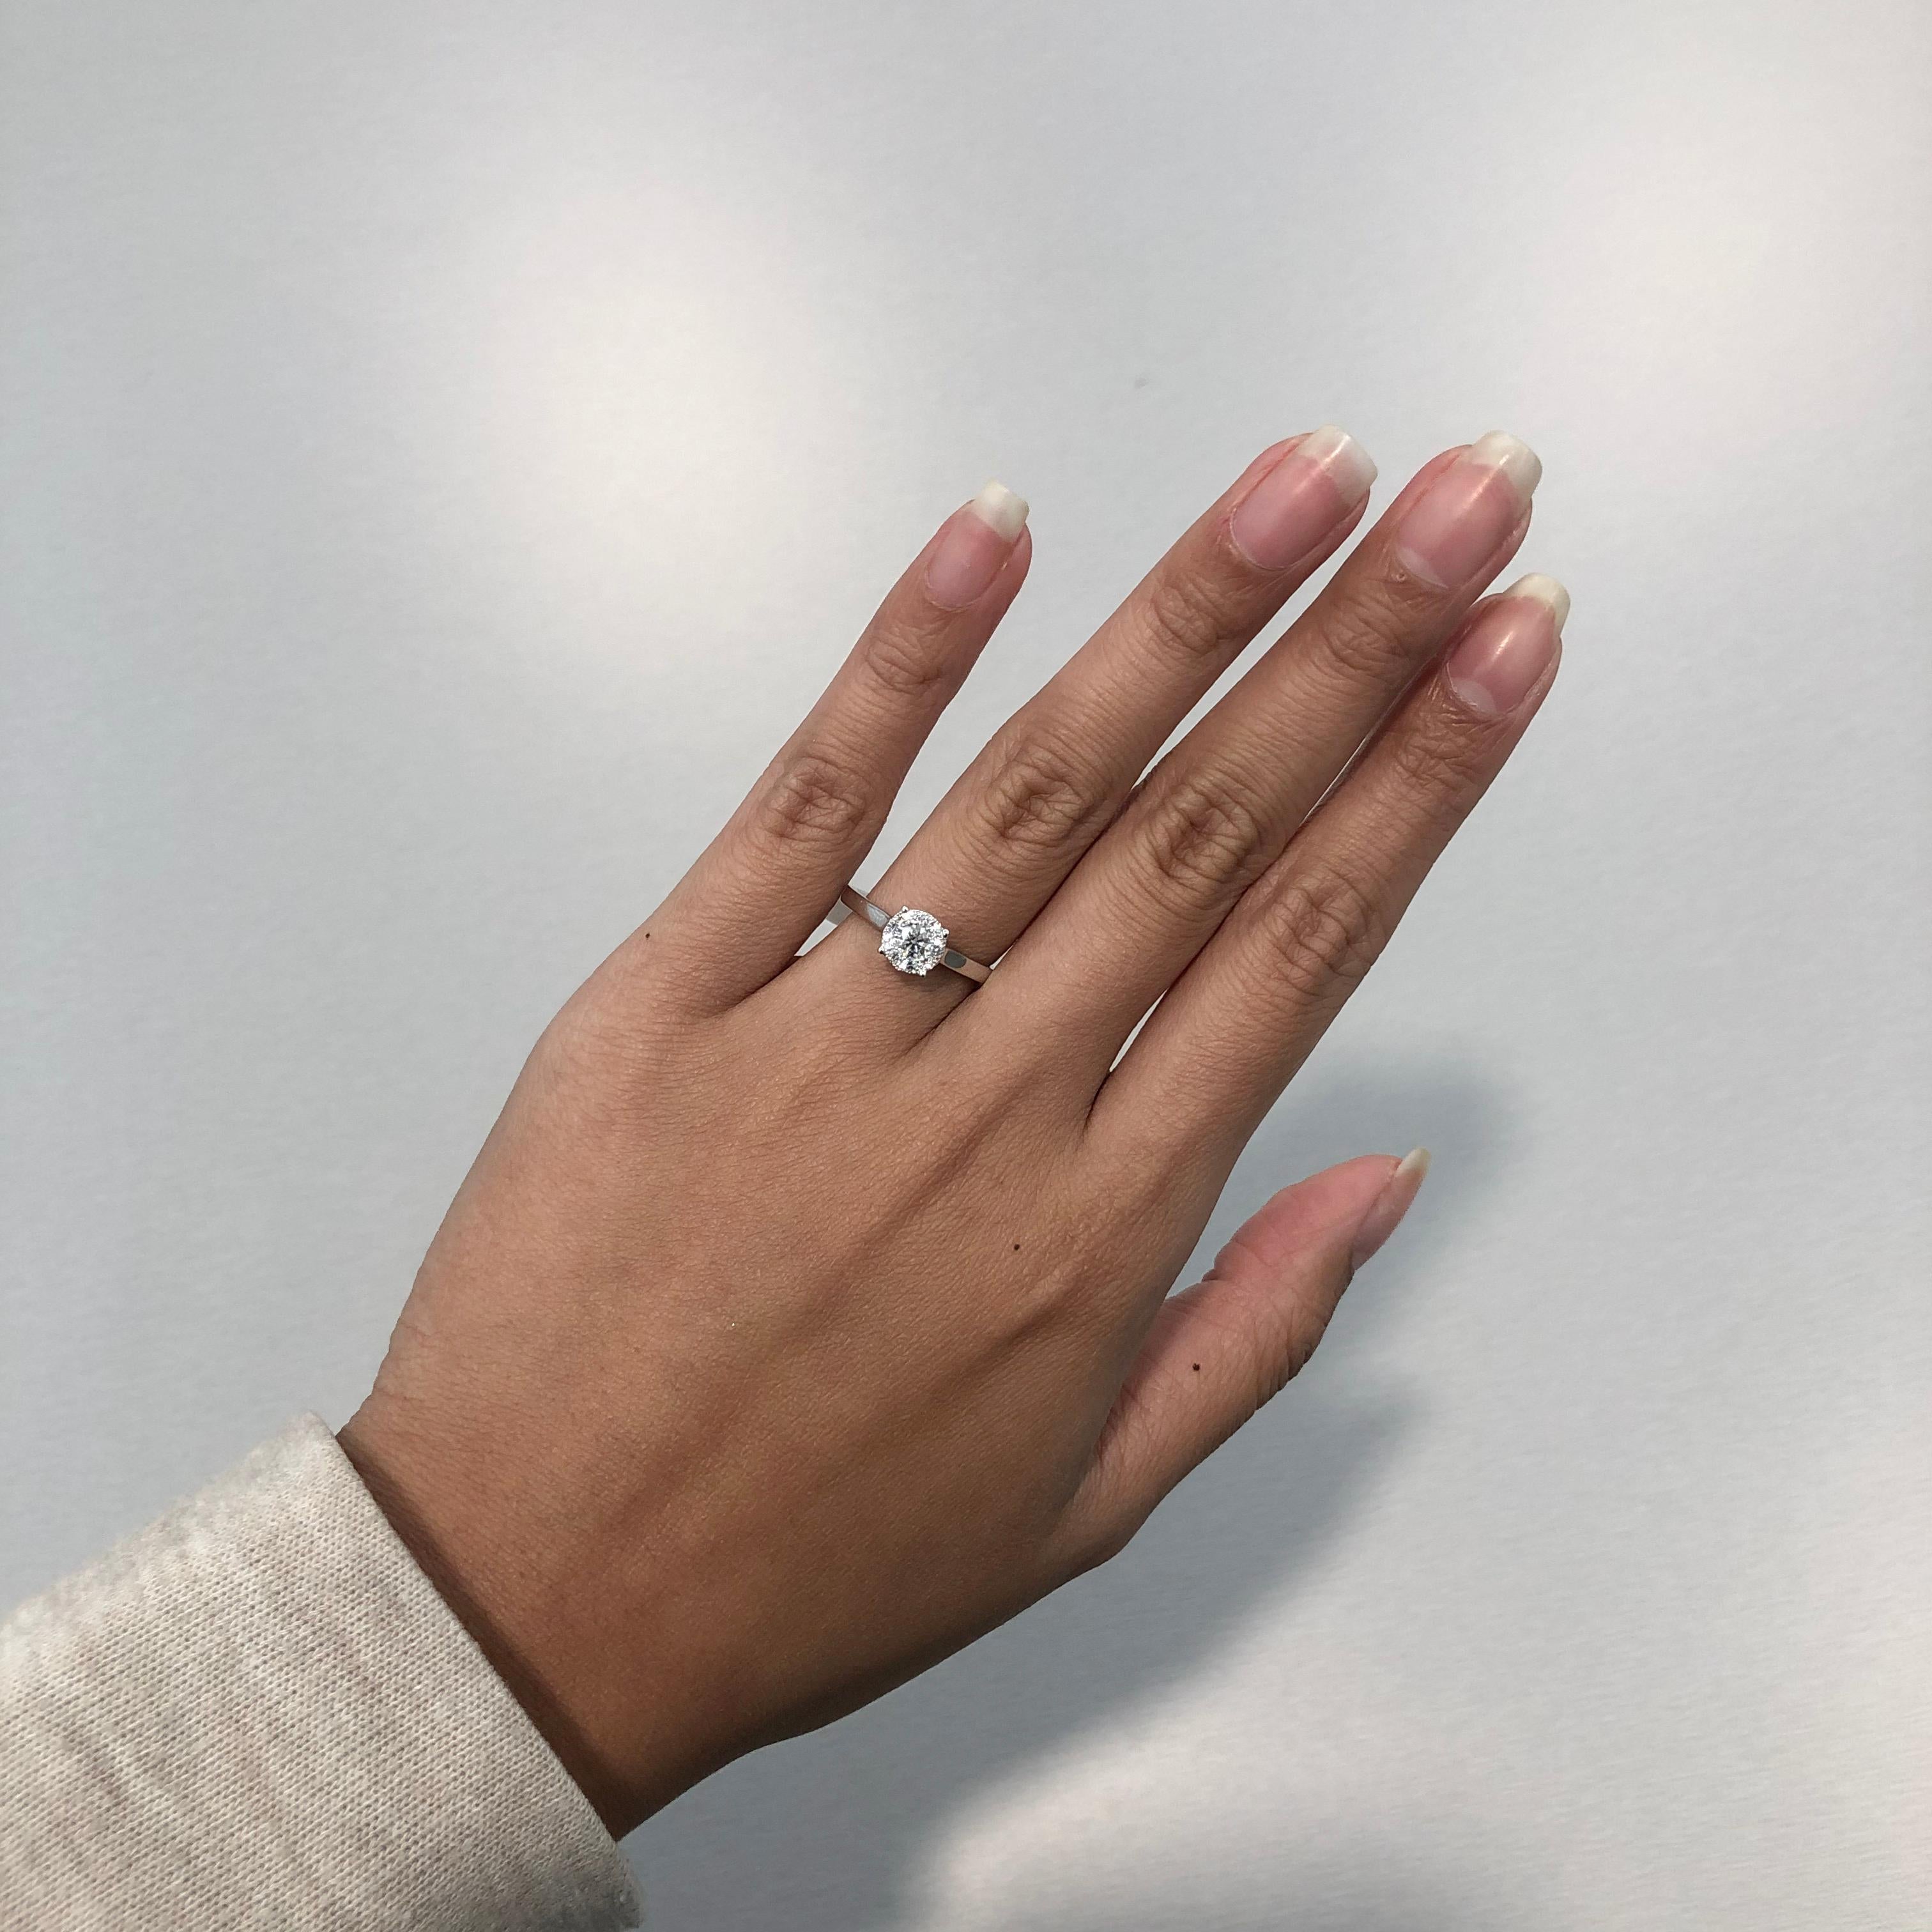 This Round Cluster Diamond Engagement Ring in 18K white gold showcases 0.39 carats of sparkling round diamonds set in a round solitaire illusion design. Finished with a handcrafted white gold composition, this ladies diamond ring makes an affordable